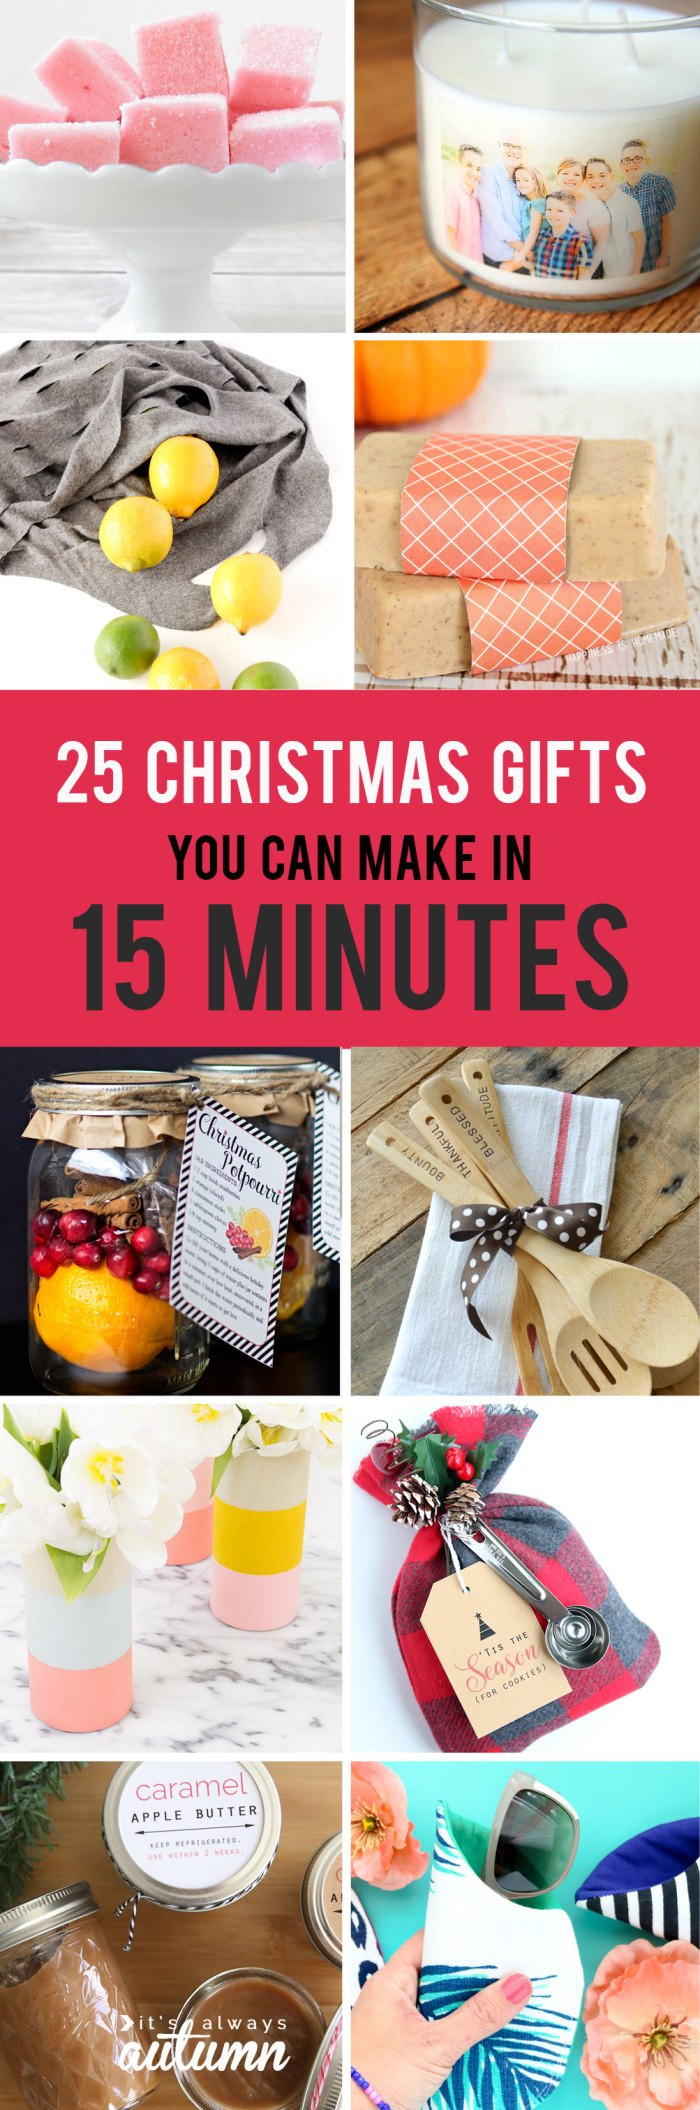 DIY Gifts Ideas For Christmas
 25 Easy Christmas Gifts That You Can Make in 15 Minutes